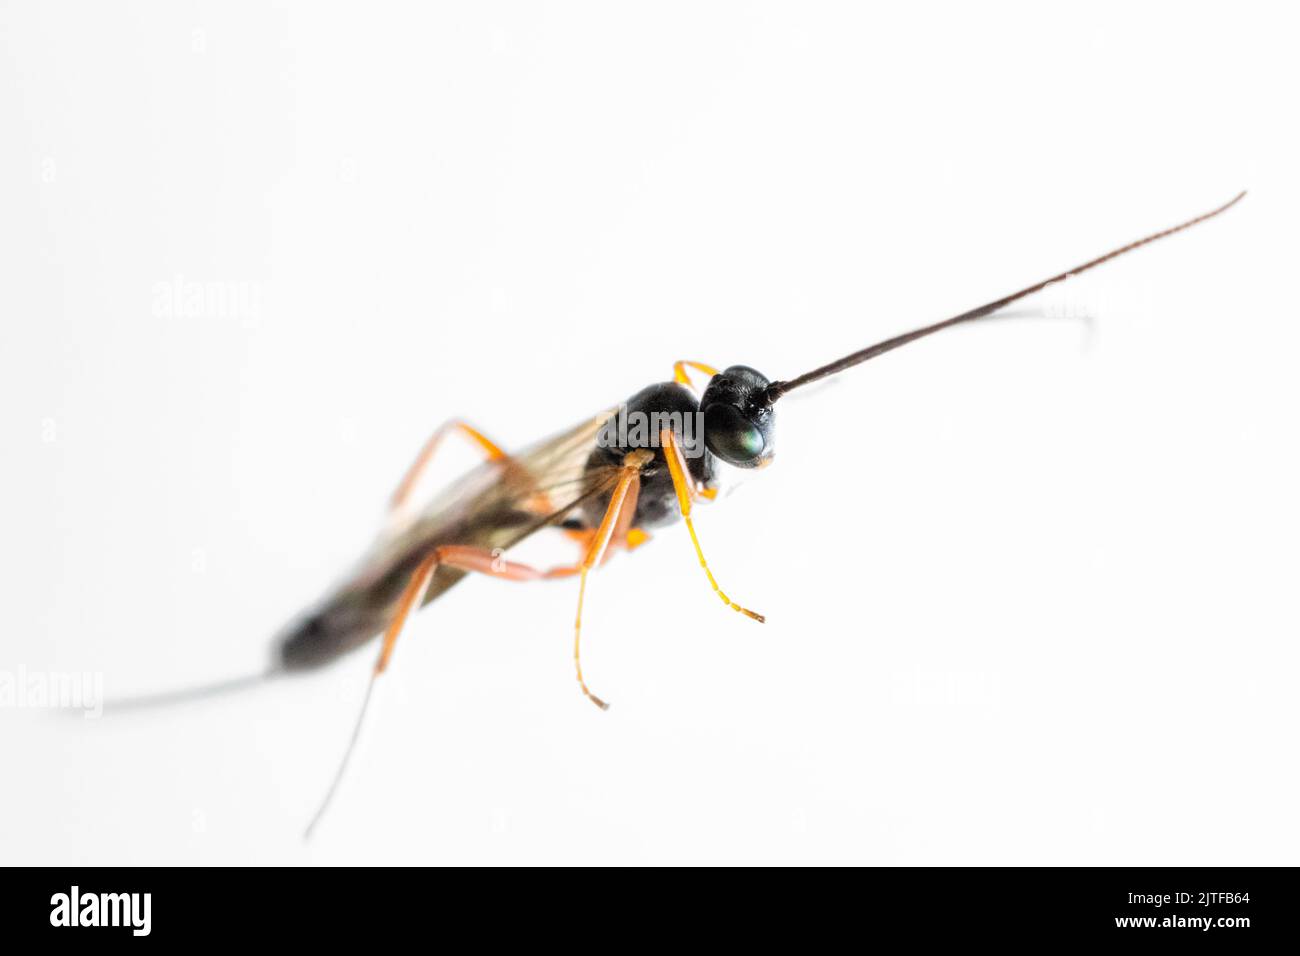 Ichneumon wasp, Campopleginae, after being rescued from the window and before being let outside, UK wildlife Stock Photo